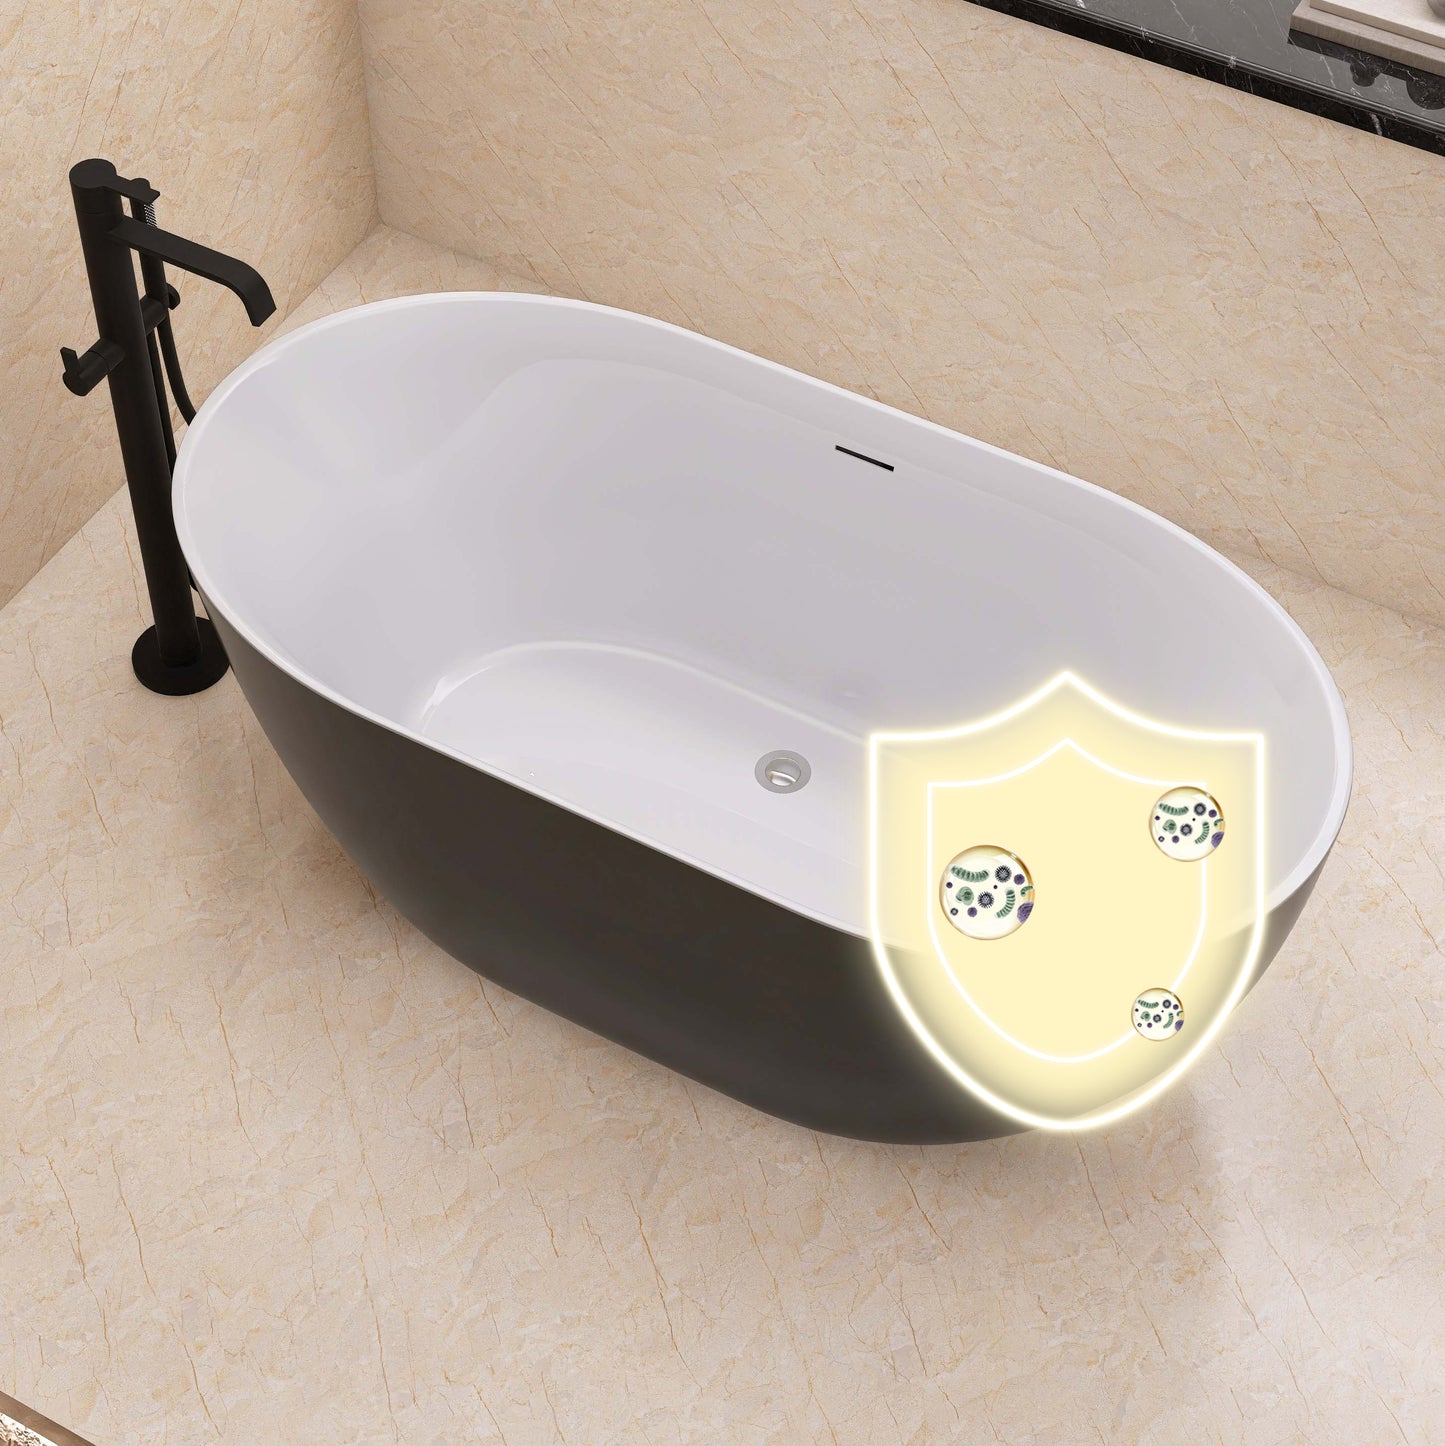 59" Acrylic Free Standing Tub - Classic Oval Shape Soaking Tub, Adjustable Freestanding Bathtub with Integrated Slotted Overflow and Chrome Pop-up Drain Anti-clogging Gloss Black